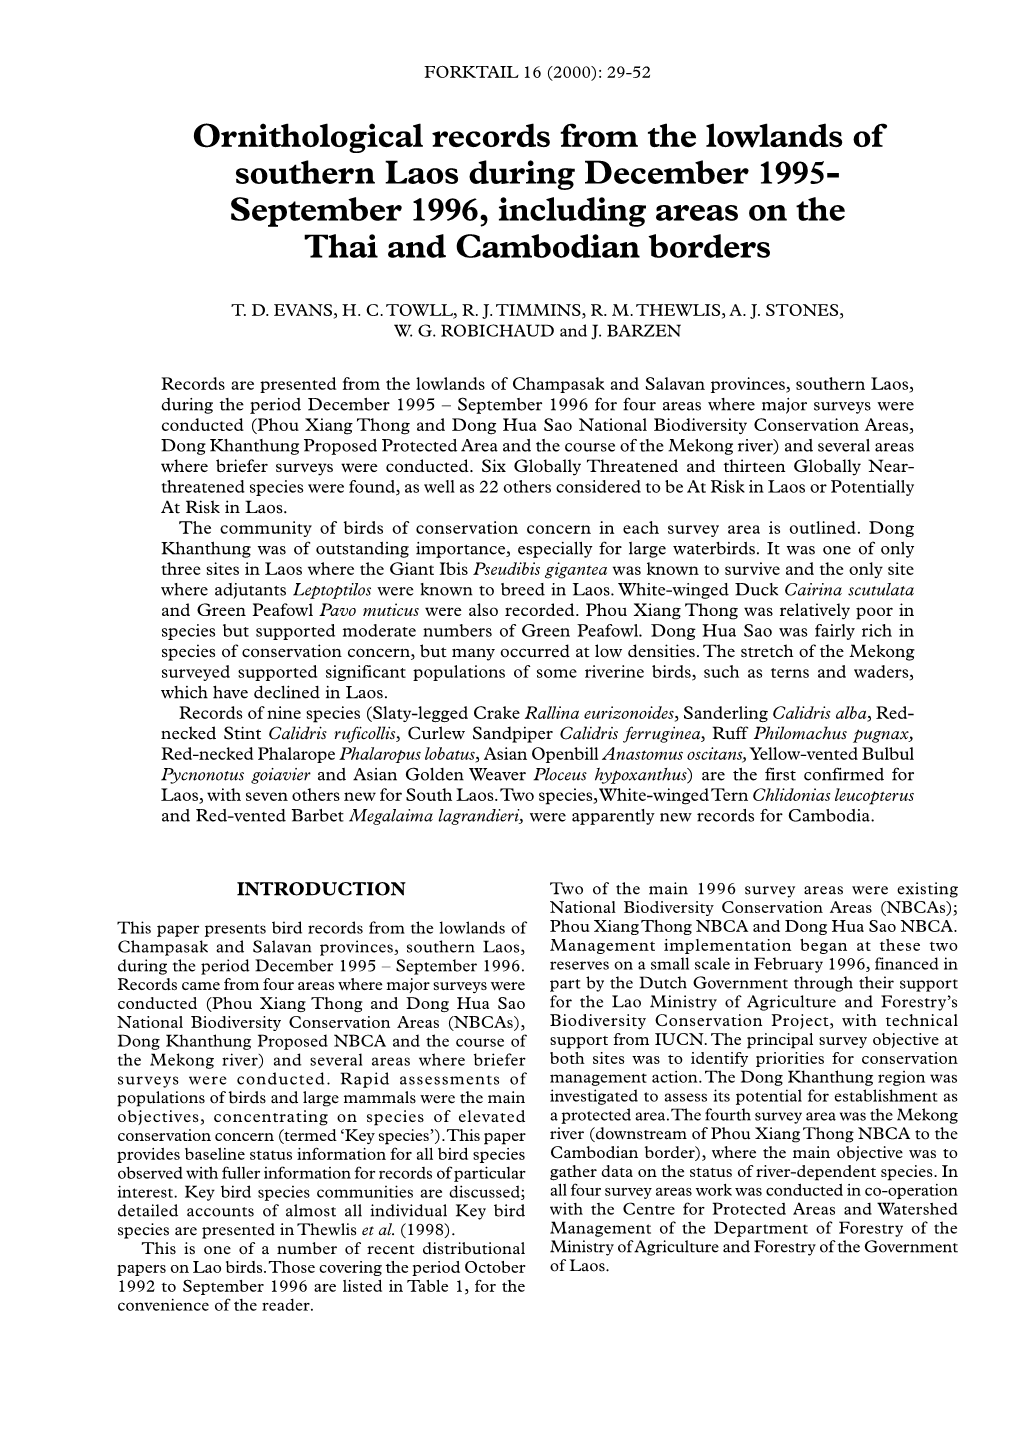 Ornithological Records from the Lowlands of Southern Laos During December 1995- September 1996, Including Areas on the Thai and Cambodian Borders